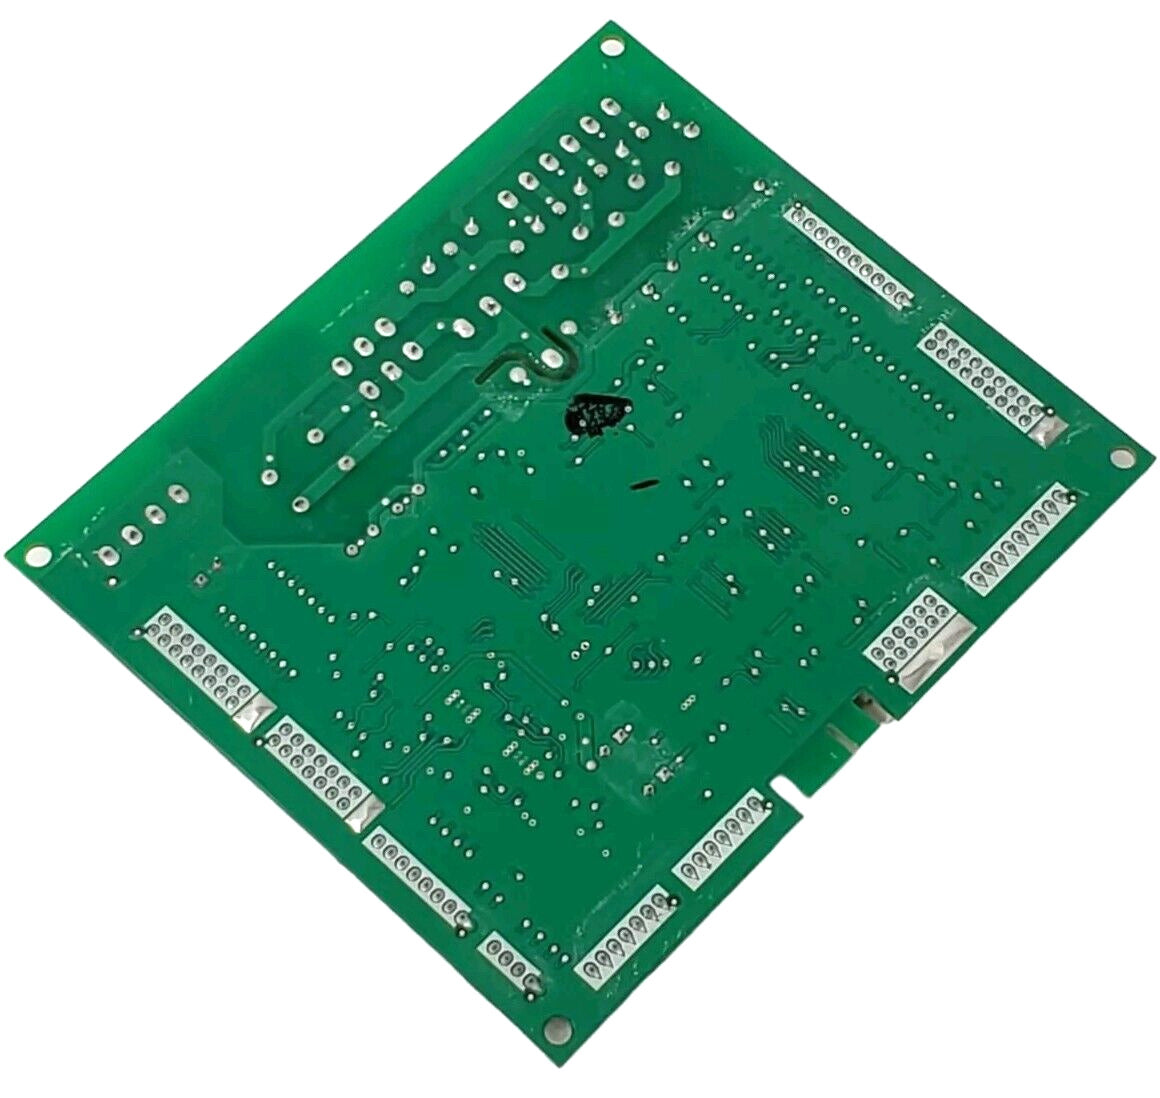 OEM Replacement for GE Fridge Control 245D2240G004